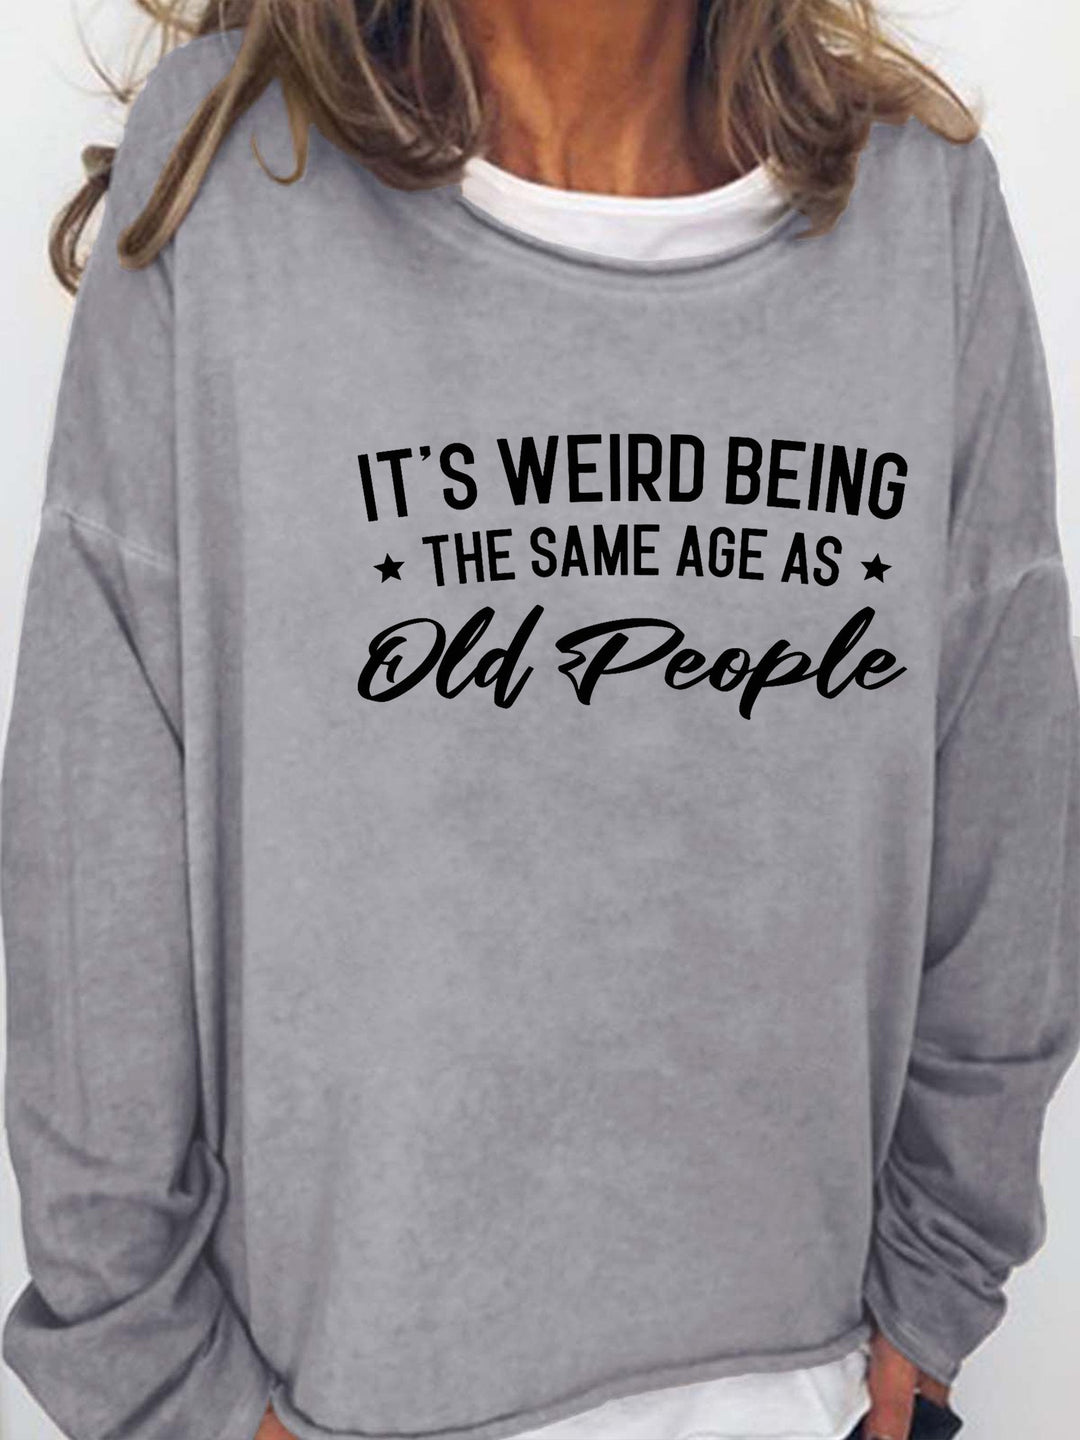 It's Weird Being The Same Age As Old People Long Sleeve Shirt